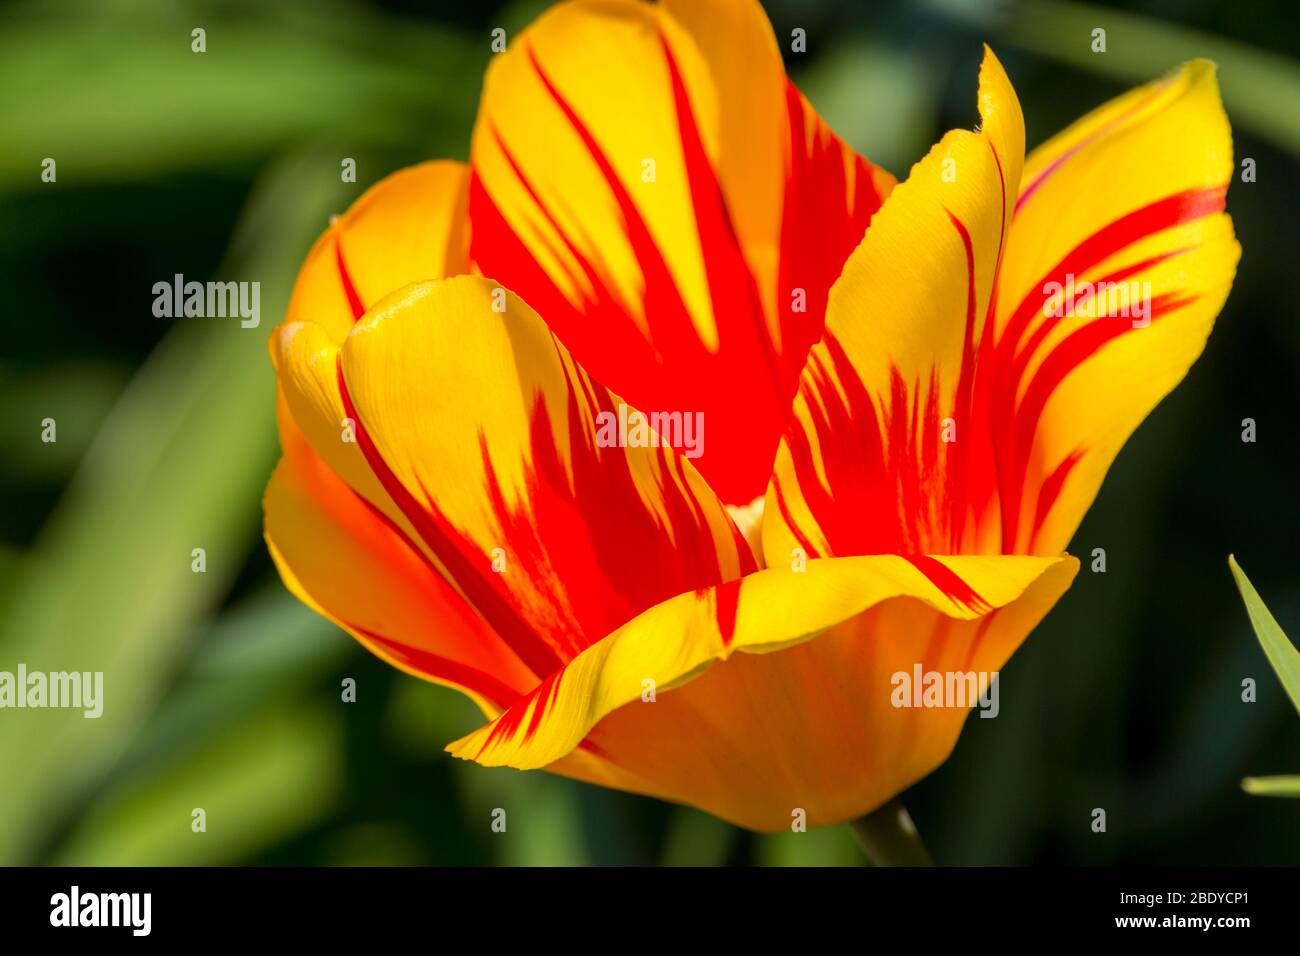 Tulip open bright yellow and red flower large petals colourful late spring plant grown from bulbs. Stock Photo